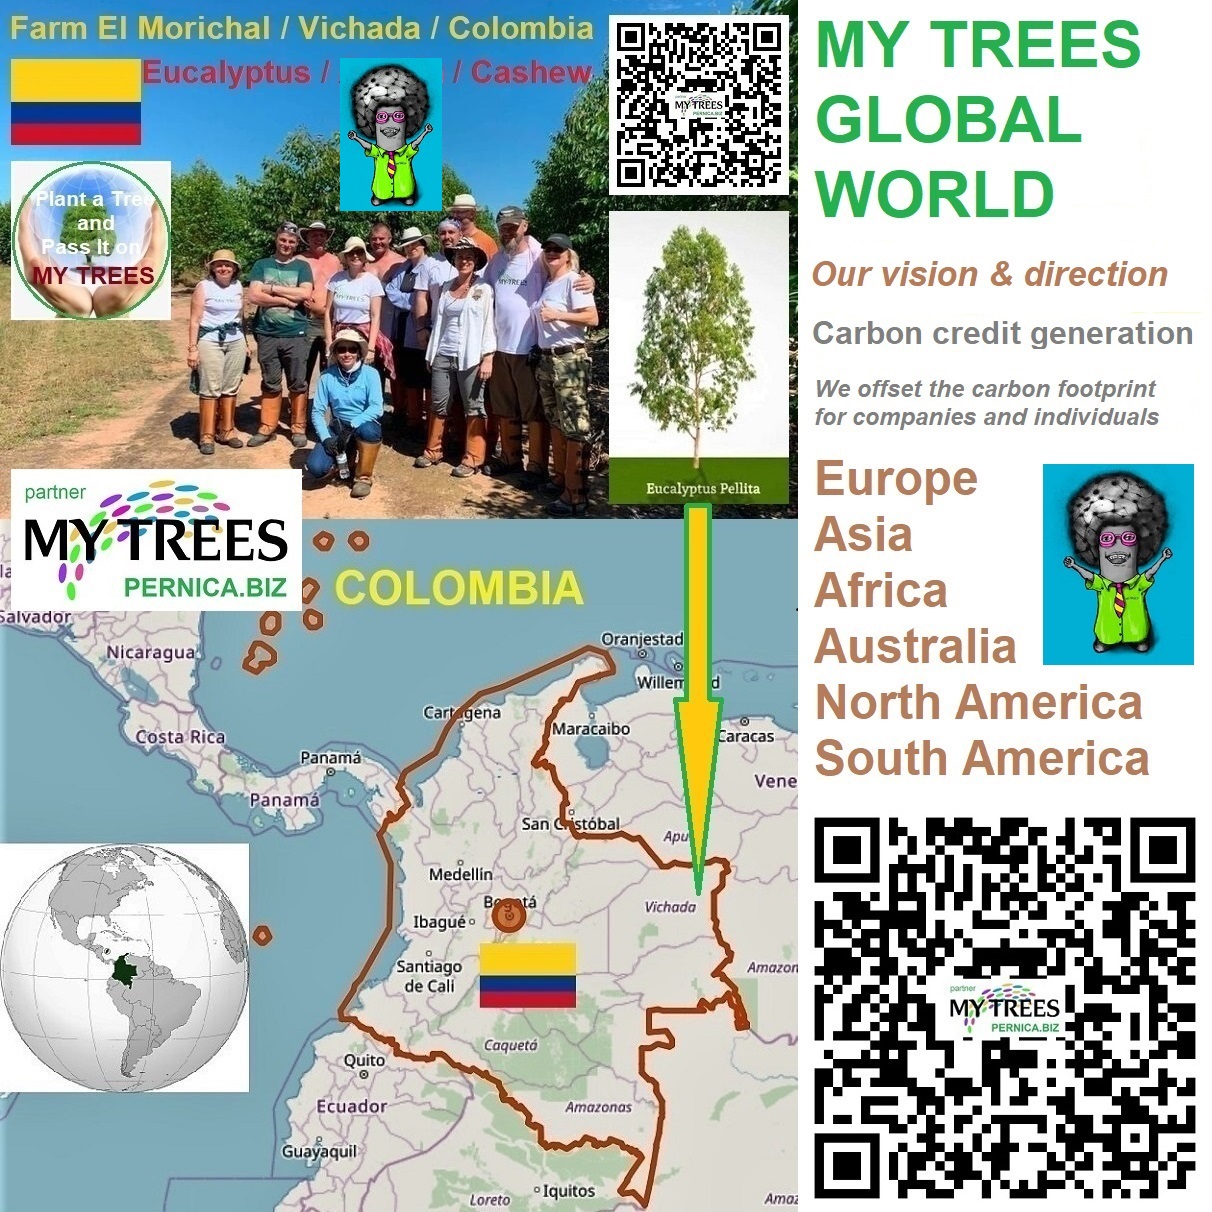 MY TREES Global project and Eco-Business. Farm El Morichal, Vichada, Colombia. We plant this fast-growing trees - Eucalyptus, Acaccia, Cashew. Zdenek Pernica/PERNICA.BIZ is partner of the My Trees project. Join us!